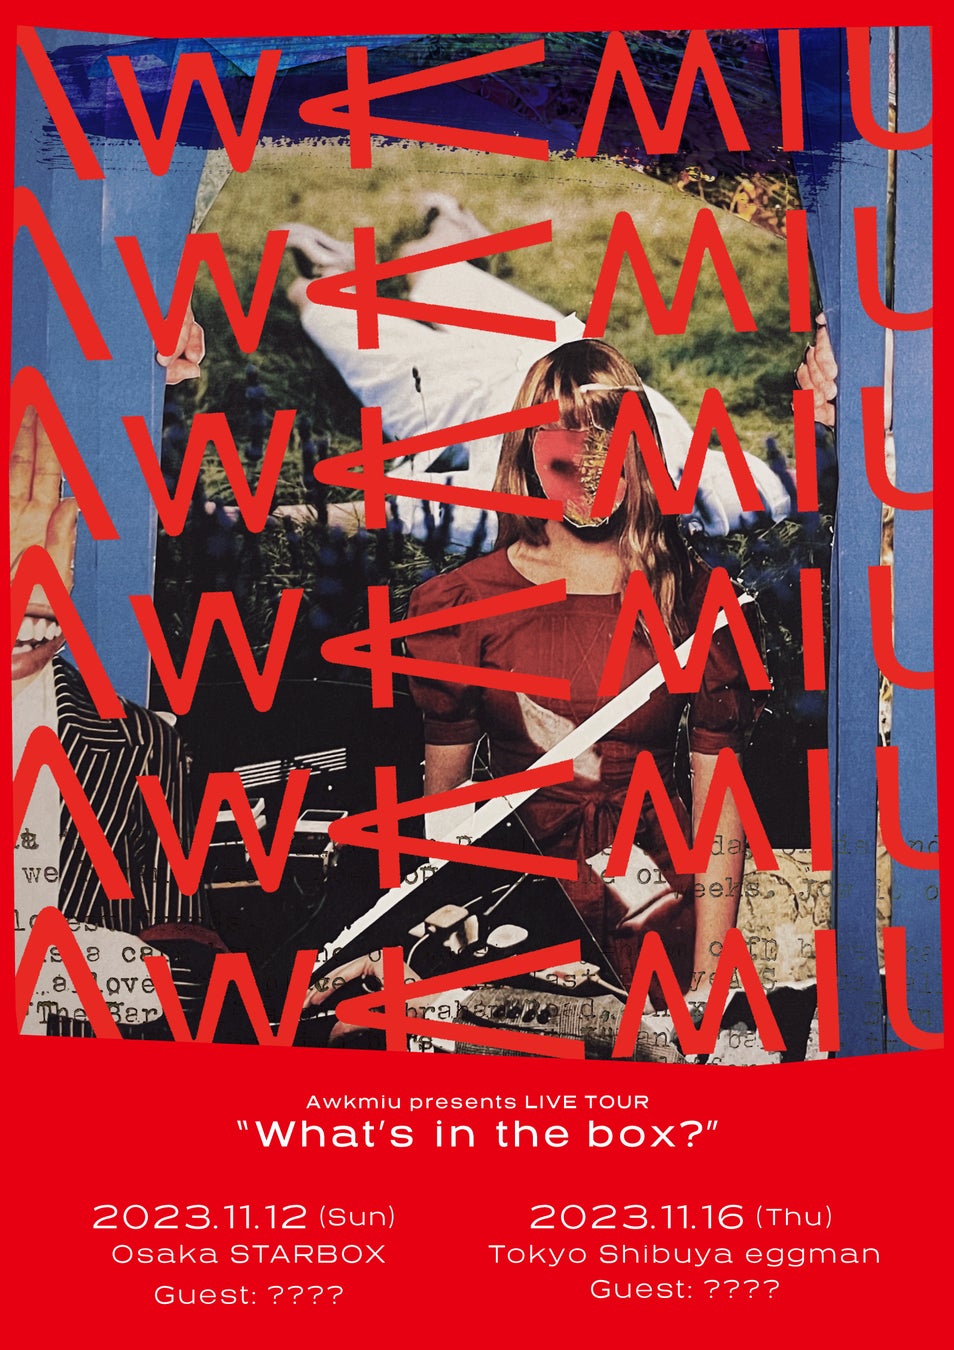 Awkmiu presents LIVE TOUR “What’s in the box?” 11月に開催決定！のサブ画像2